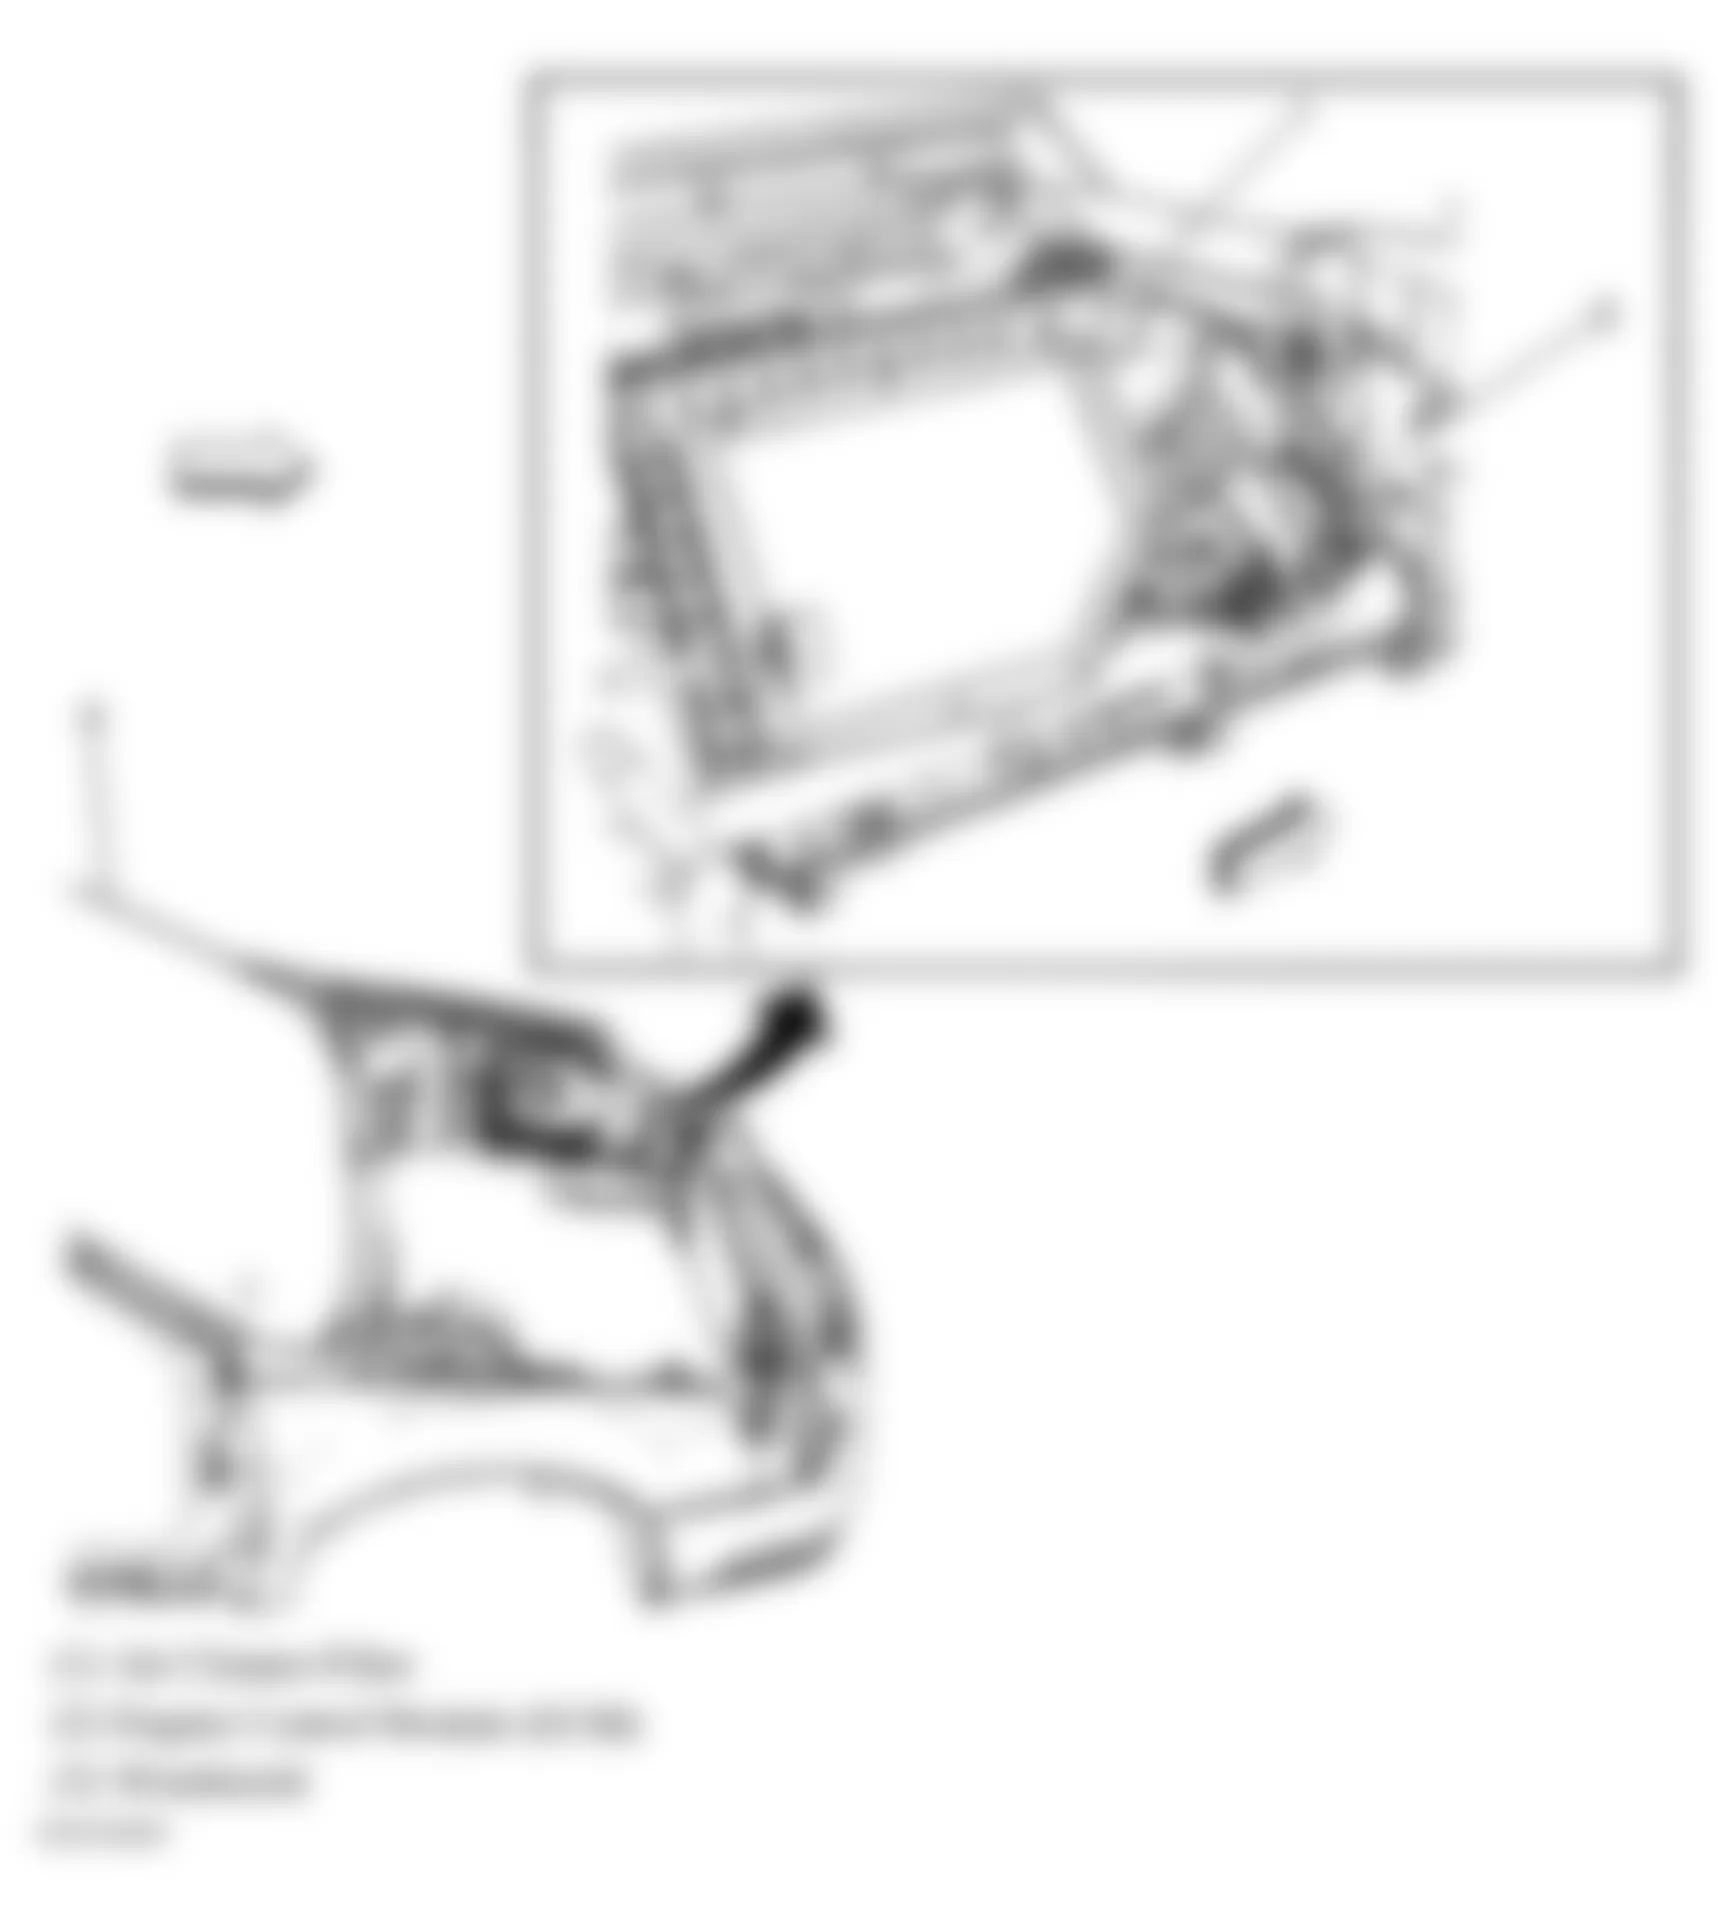 Buick Lucerne Super 2010 - Component Locations -  Engine Compartment